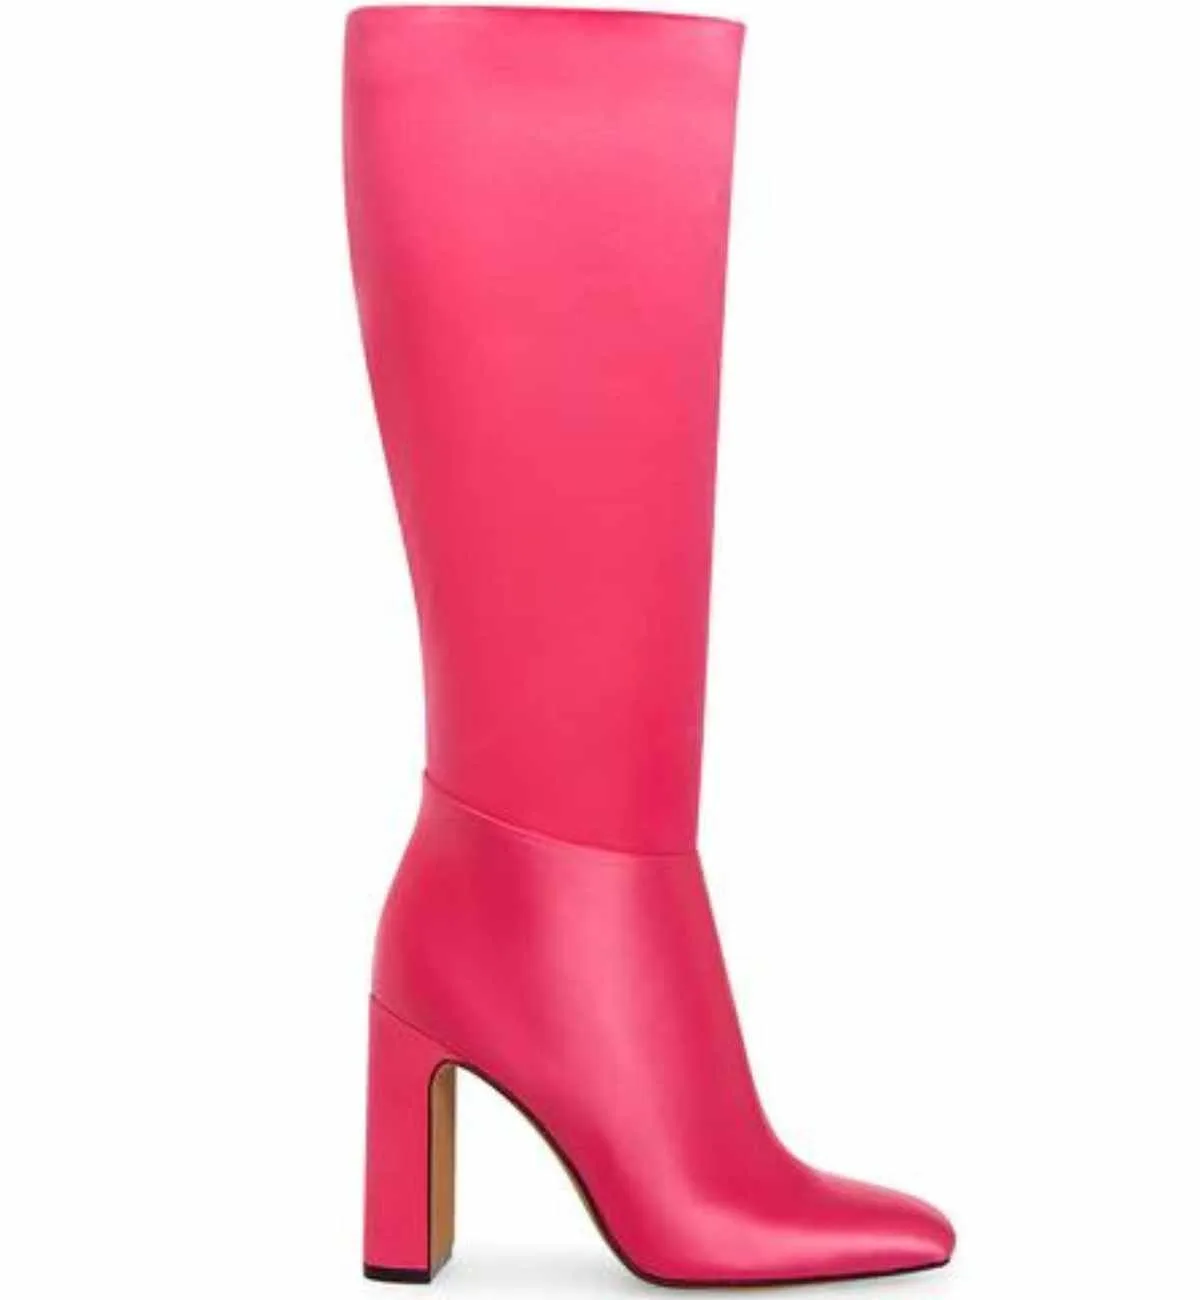 Hot pink satin Barbie core fashion boots with high heel on white background.